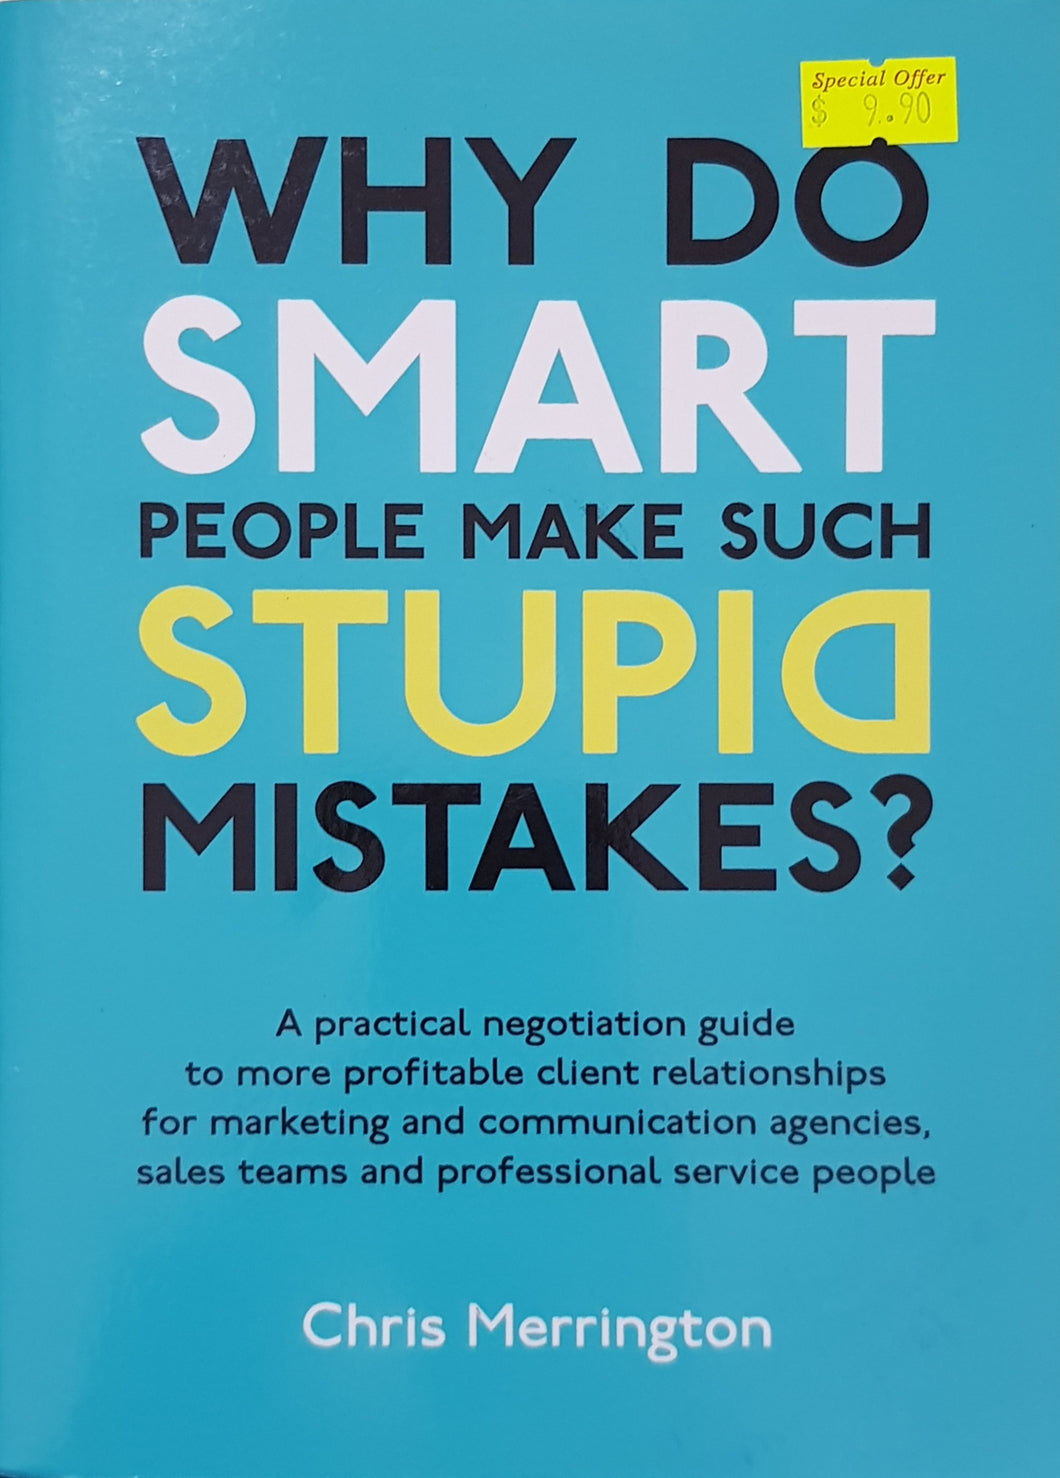 Why Do Smart People Make Such Stupid Mistakes? - Chris Merrington